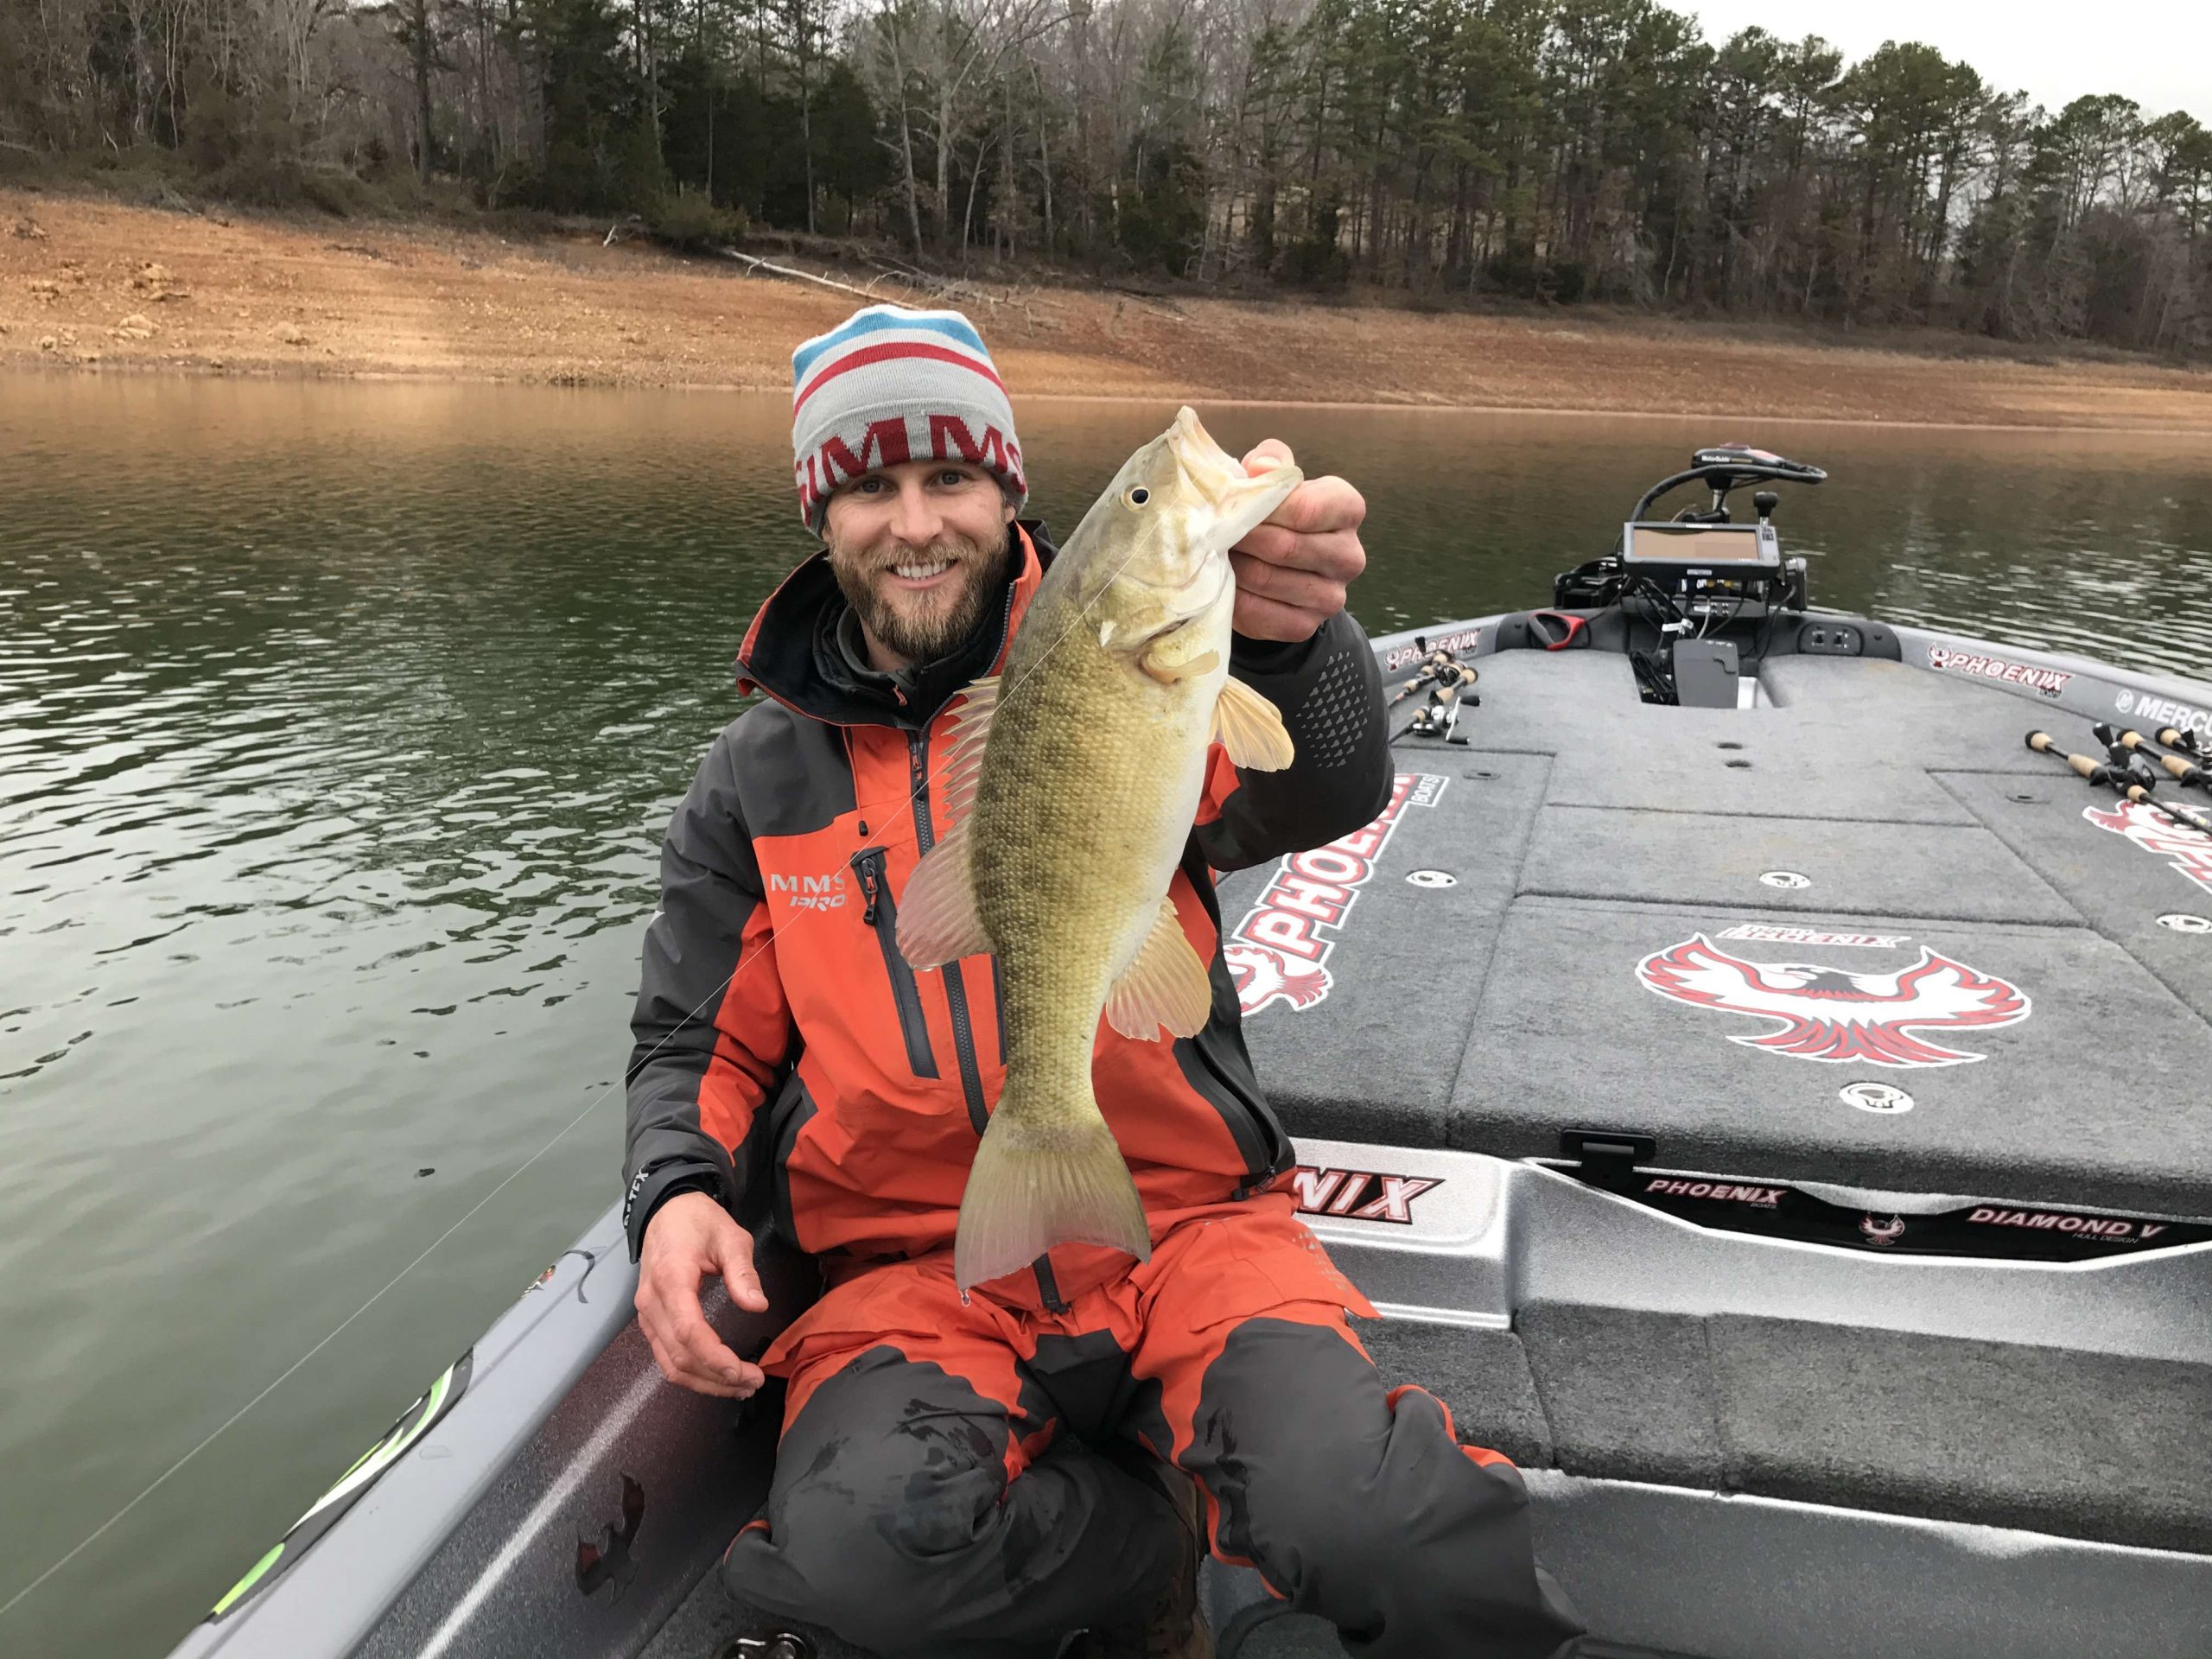 James Elam culls a small spot with a nice 3 pound smallmouth. Smallmouth are roaming, relating to the bait fish. Elam is putting on a clinic with his Lowrance sonars, finding fish and then getting them to come to his bait.